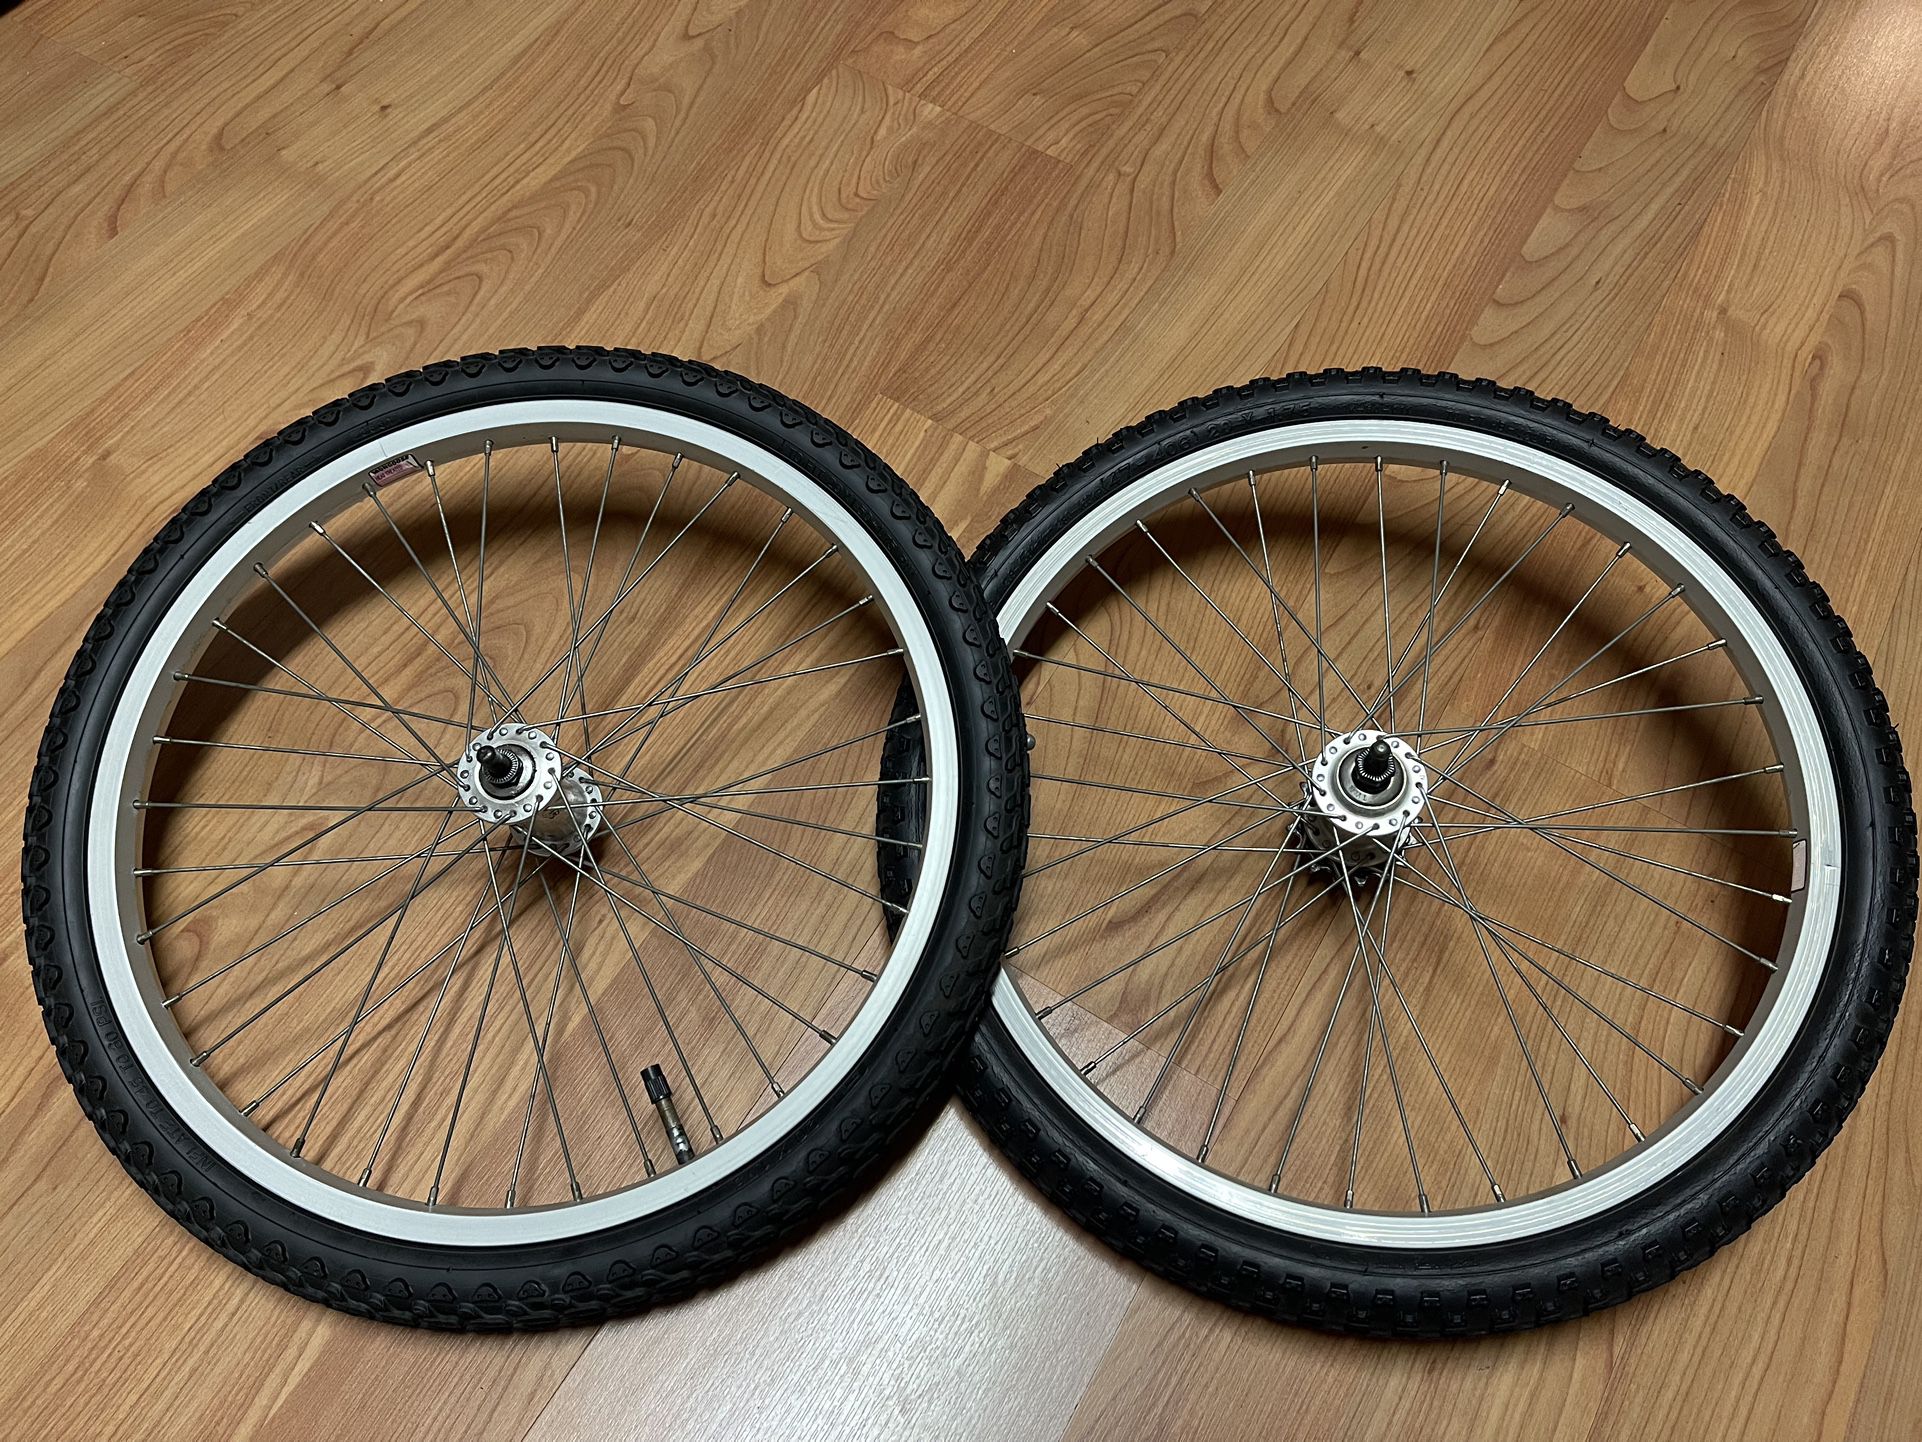 Mid School Mongoose Rims And Used Tires, 20 Inch